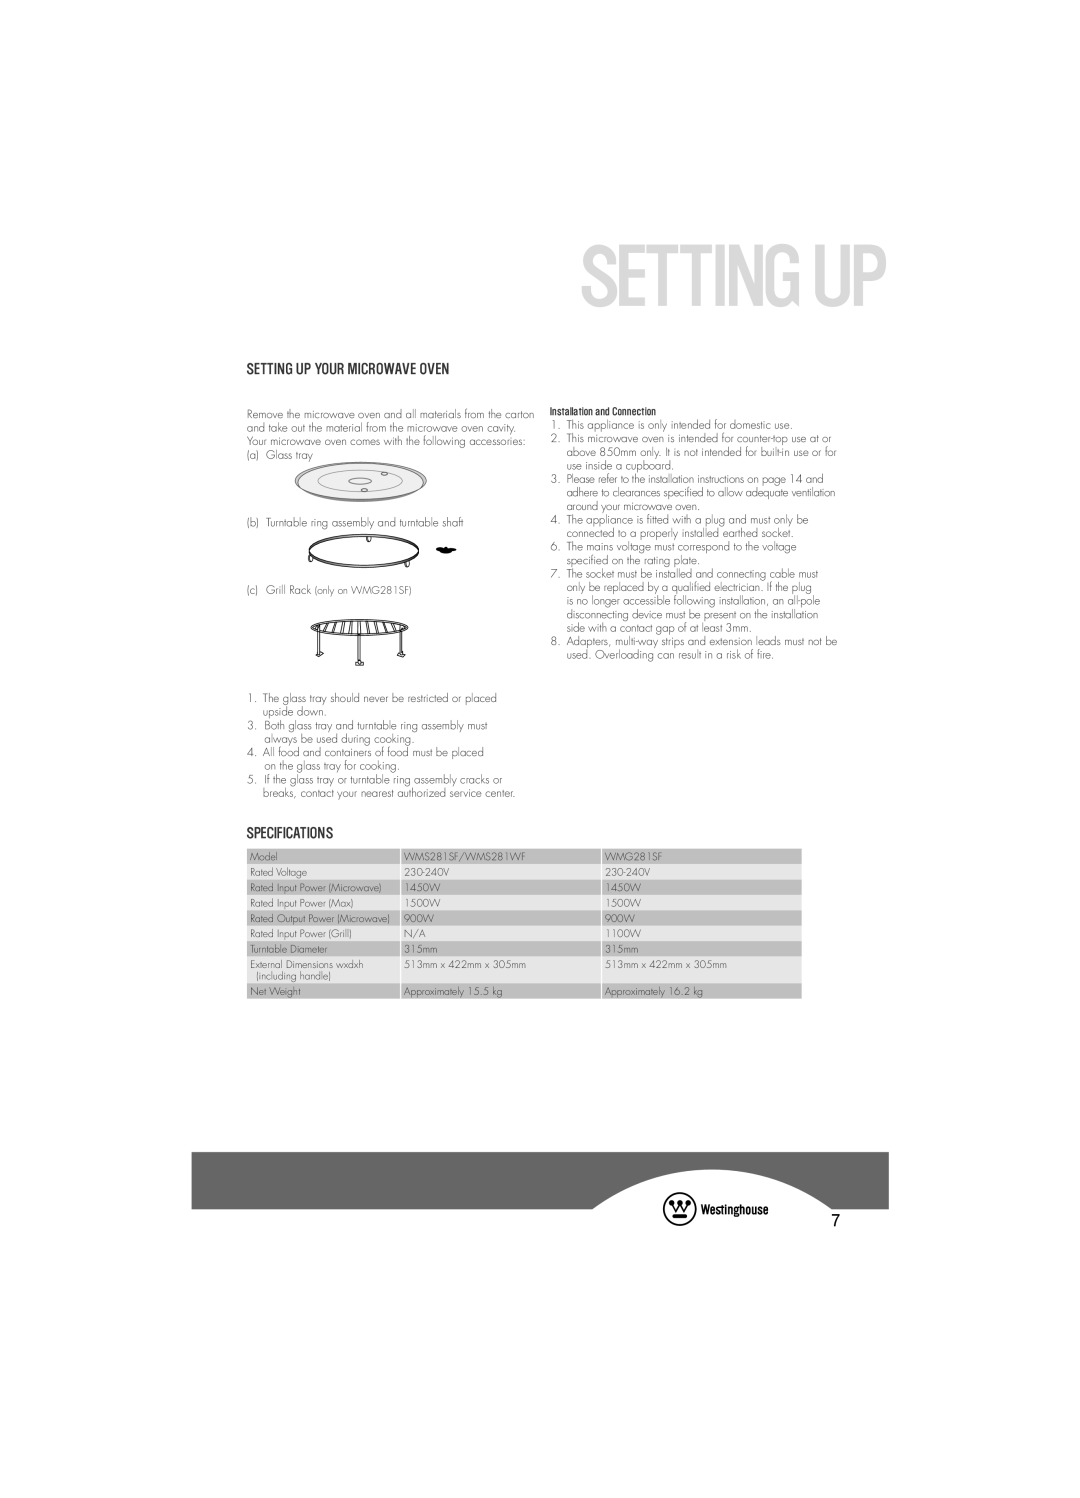 Westinghouse WMS281SF, WMG281SF, WMS281WF user manual SETTINGUp, SETTING Up YOUR MICROWAVE OVEN, SpECIFICATIONS 